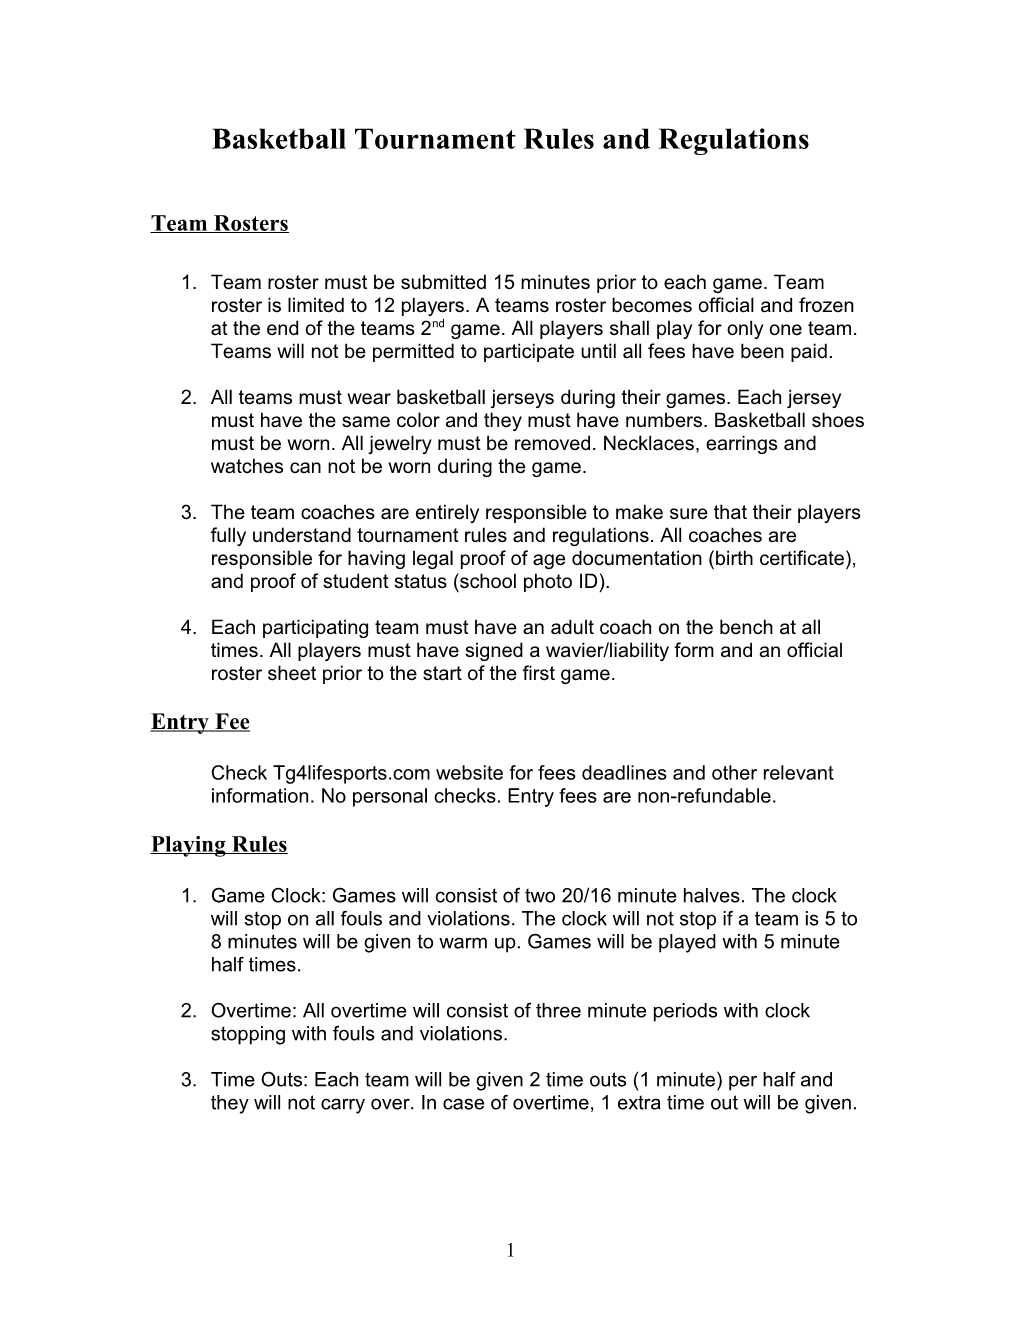 Basketball Tournament Rules and Regulations